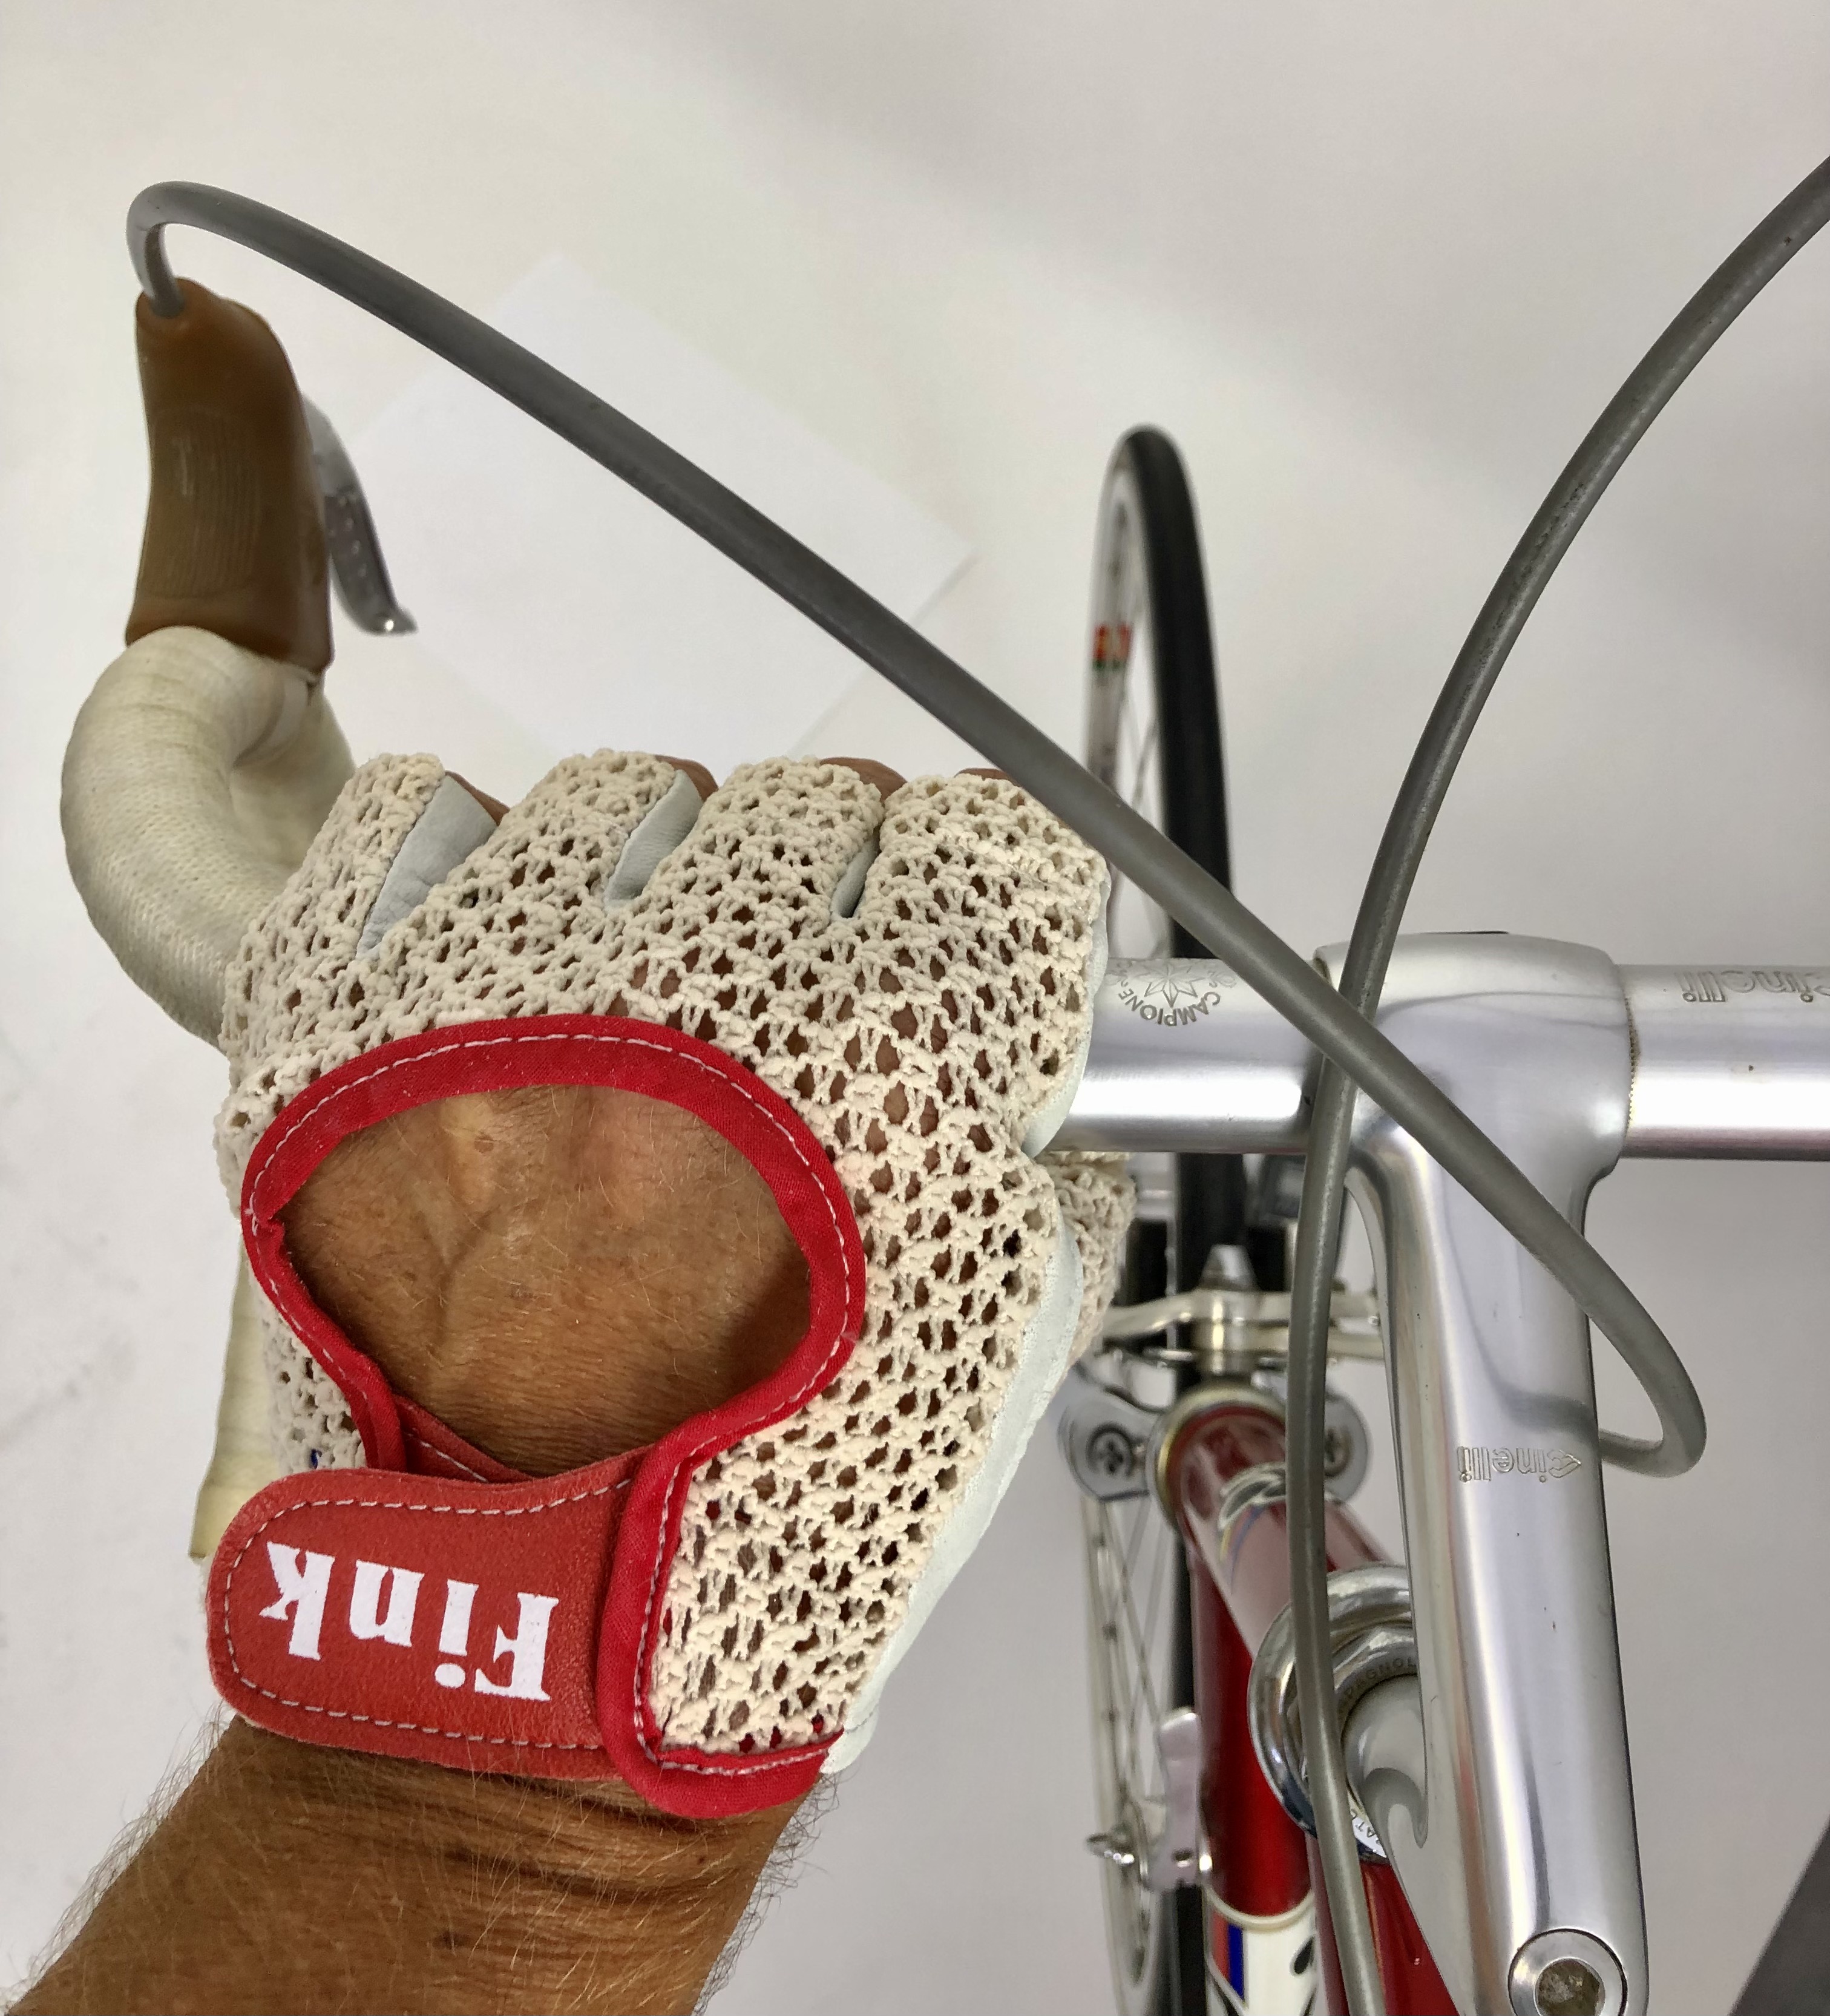 Original GANT 1970s vintage bicycle gloves with chrocheted upper hand Size 9